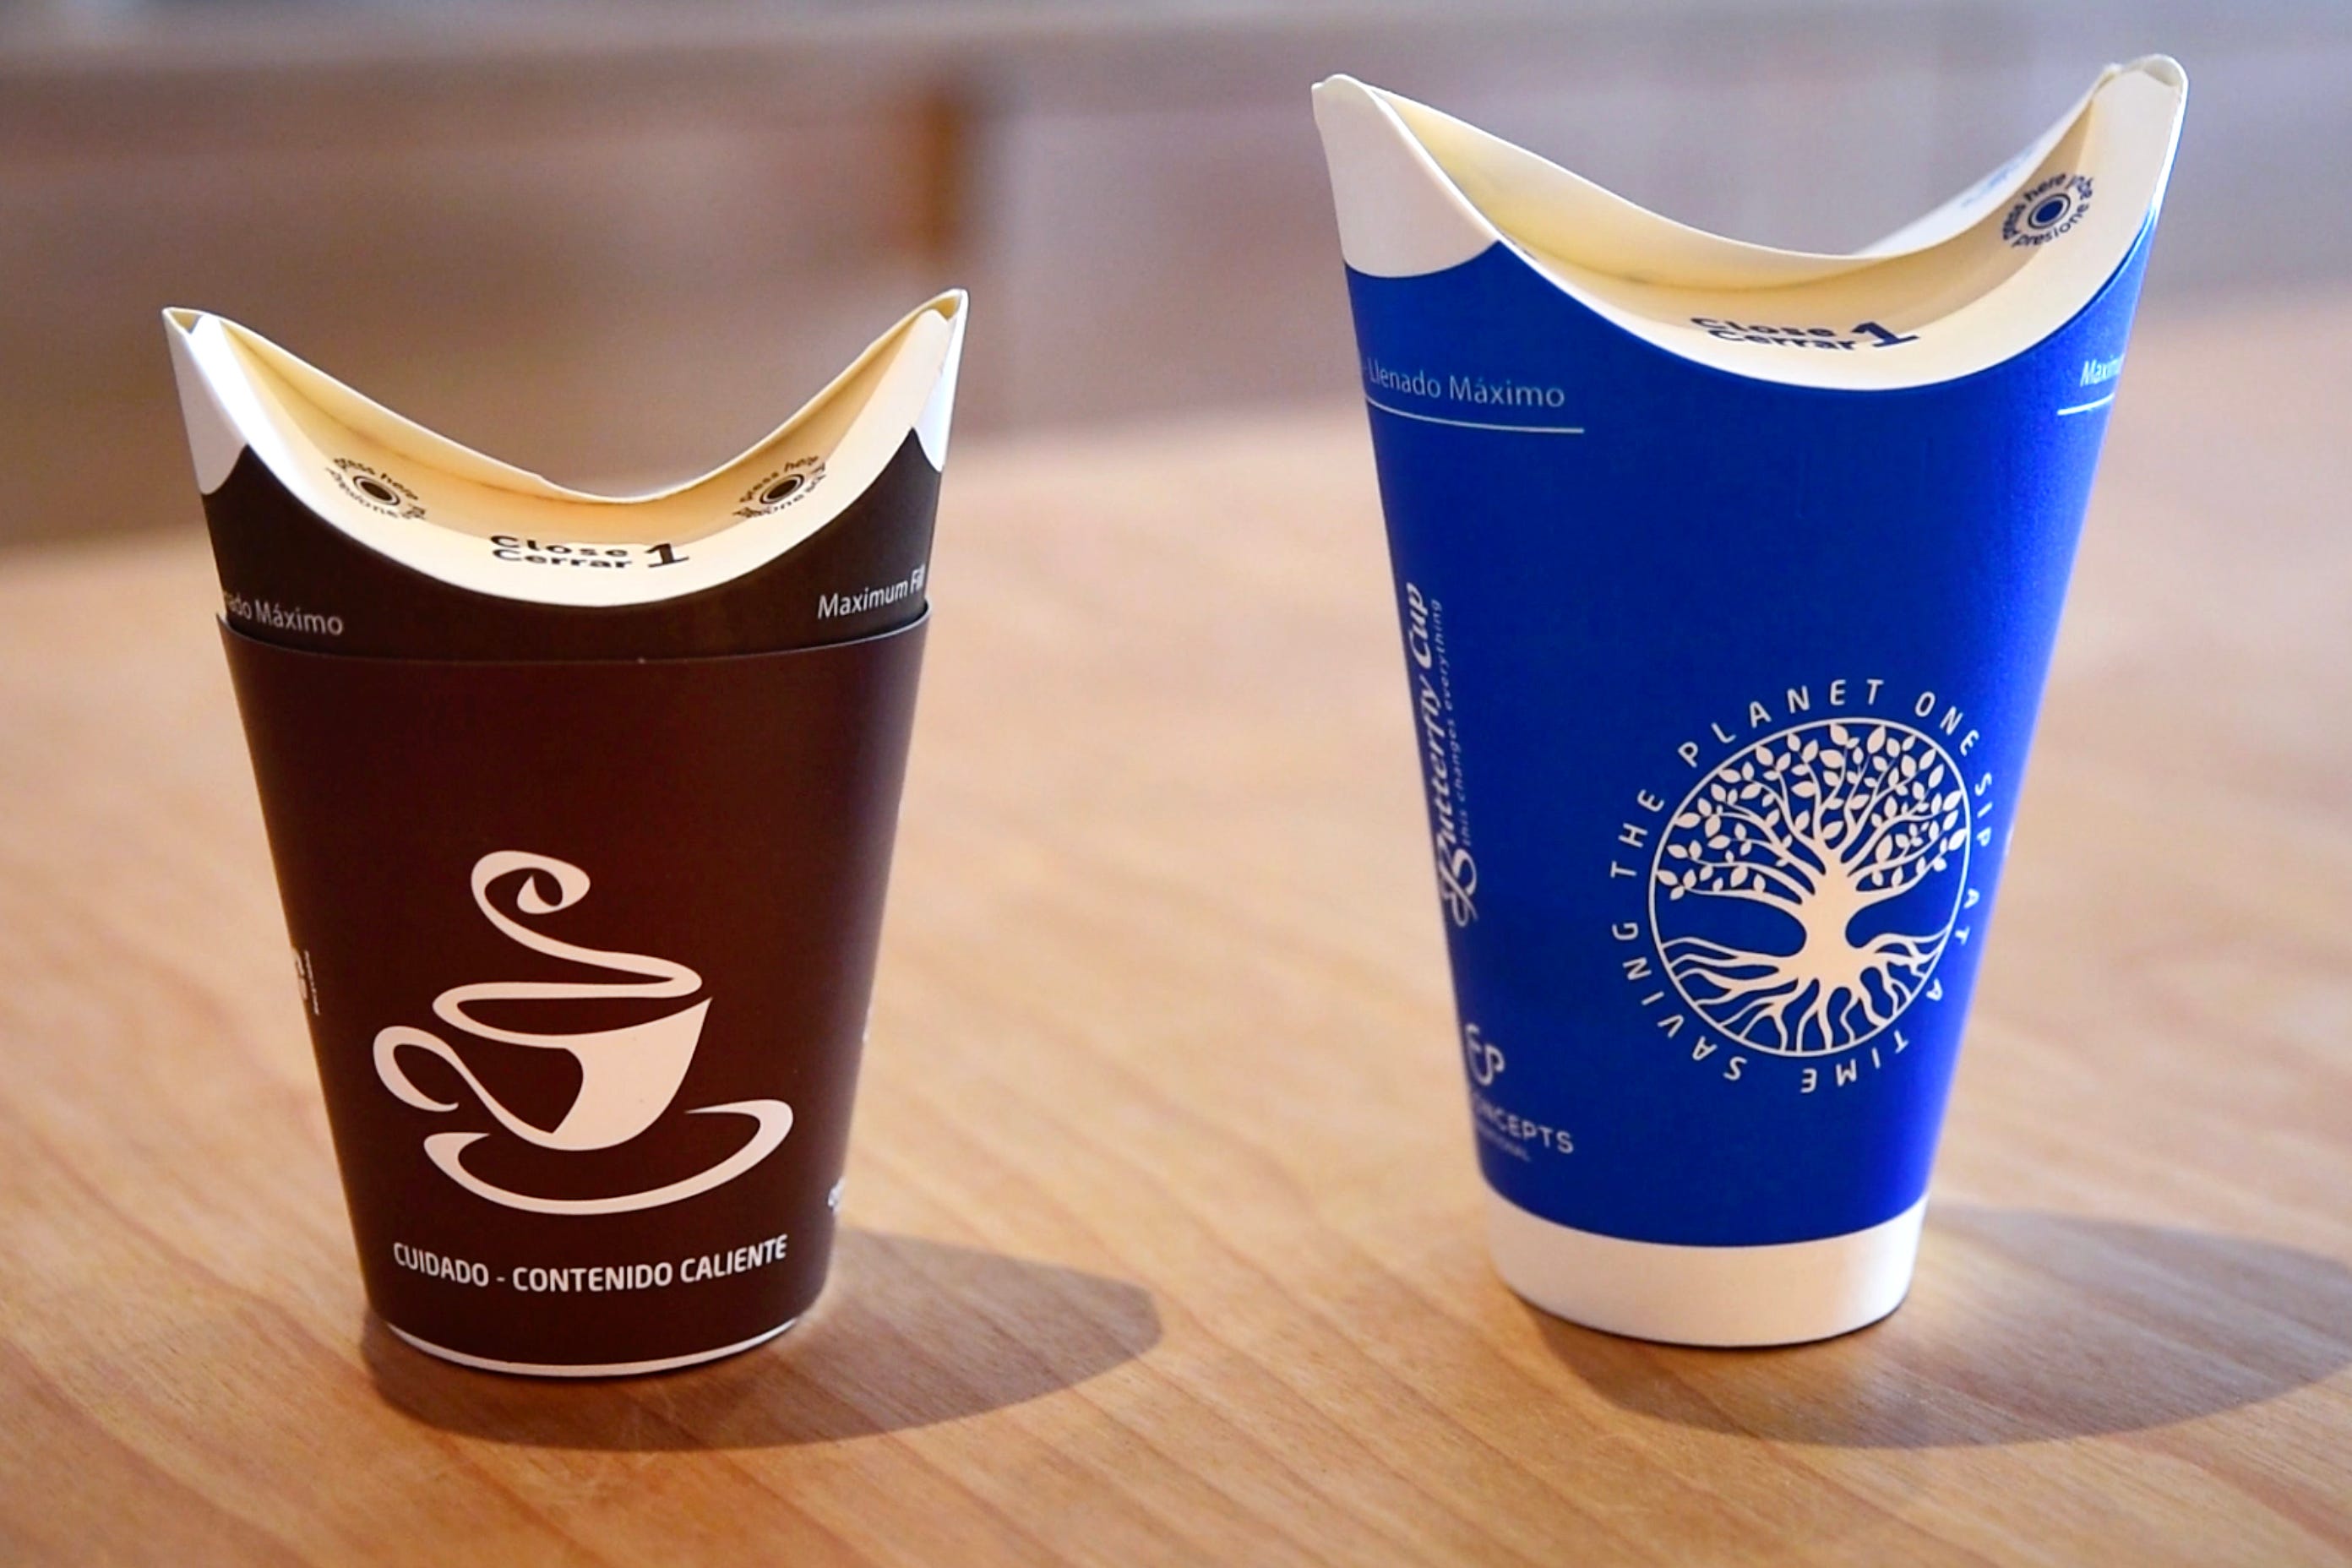 Des Moines Coffee Shop Replacing To Go Cups With Reusable Mugs